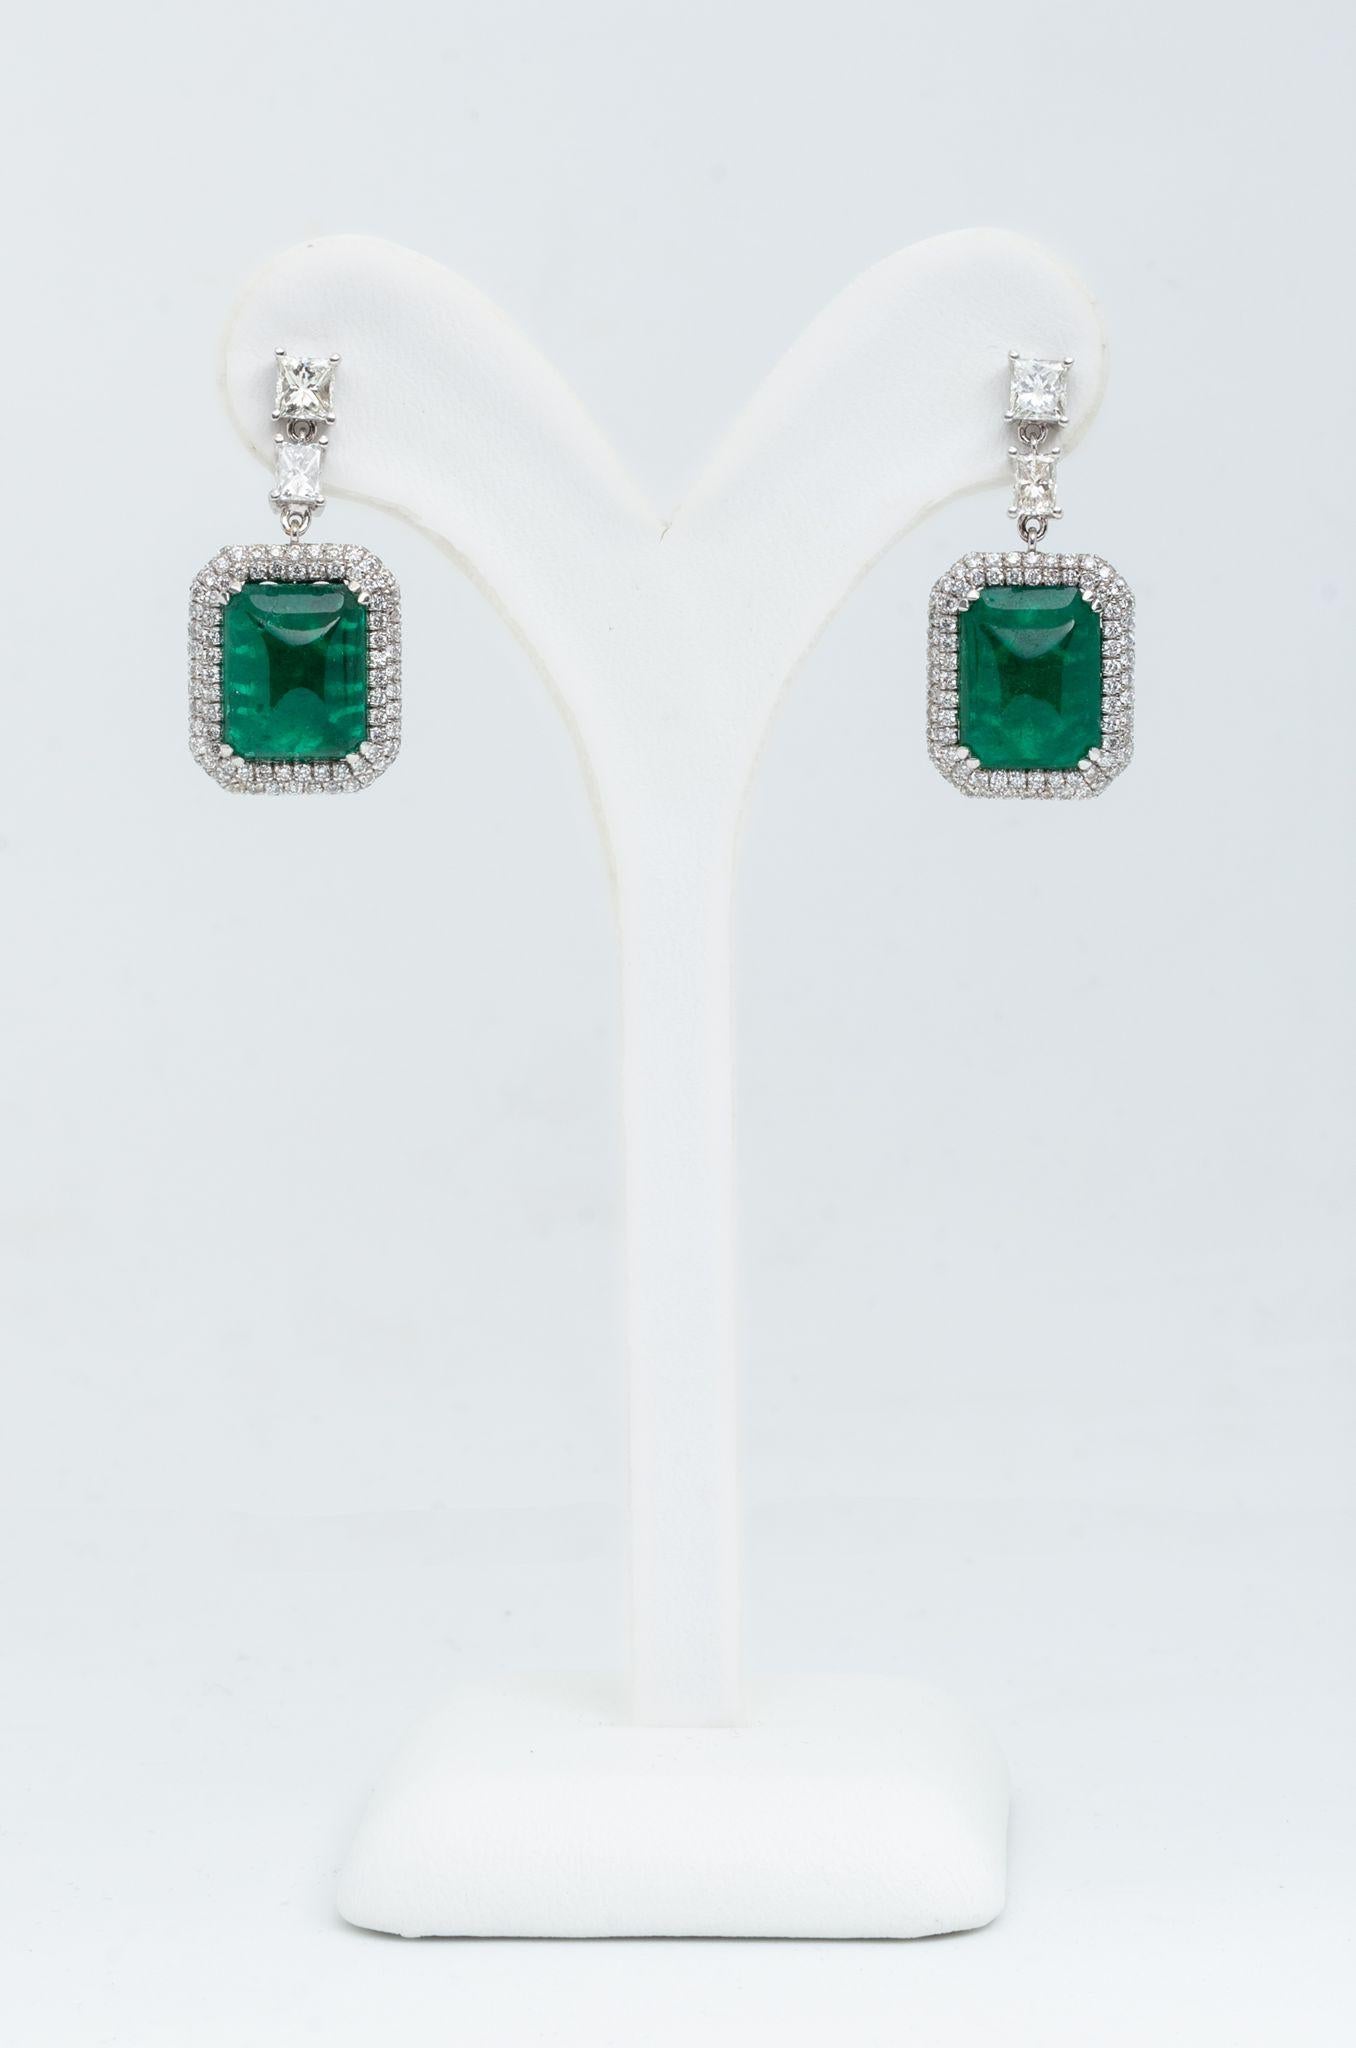 Green Emerald and Diamond Drop Earrings in 18 K White Gold 
Magnificient green Emerald stones (2 pieces Total Weight 8.75 Carat), arranged around natural diamonds (300 pieces Total Weight 2.96 Carat) in Round and princess cut, creating a majestic